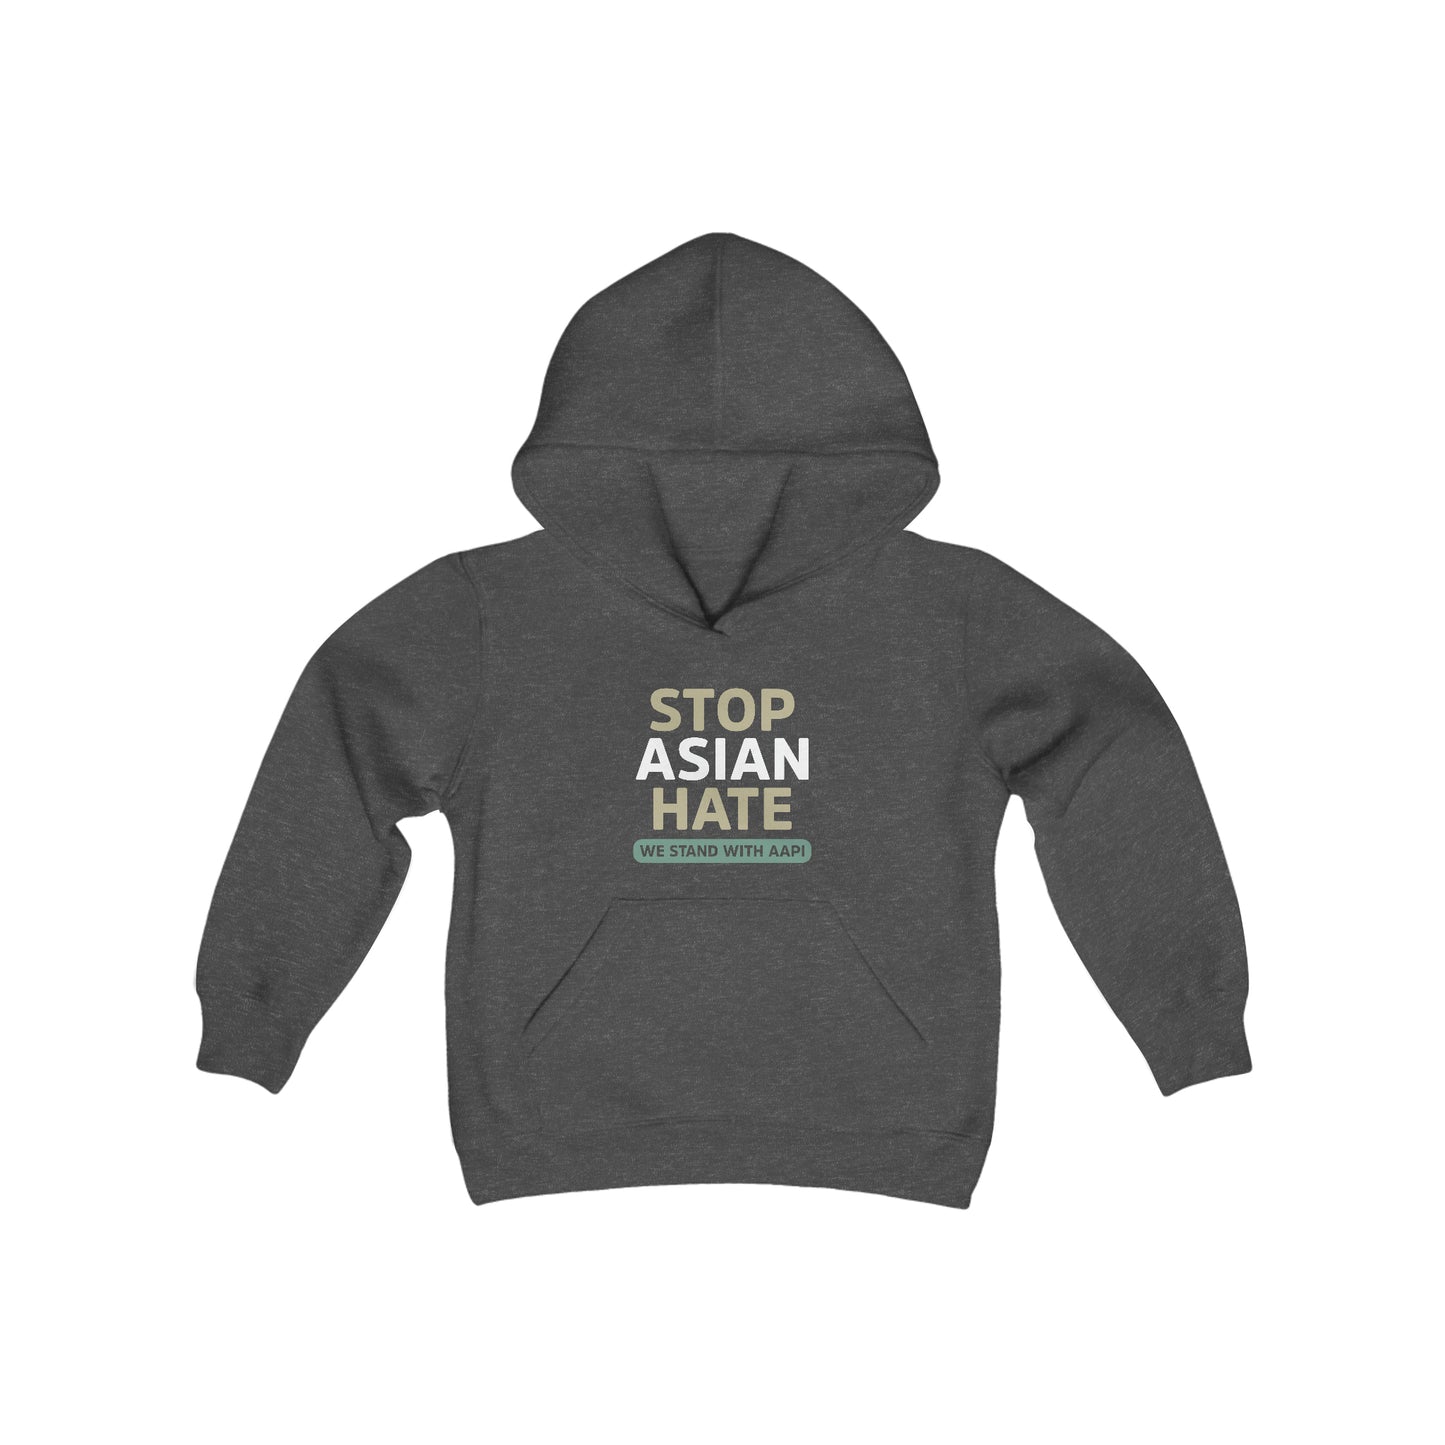 “Stop Asian Hate” Youth Hoodie